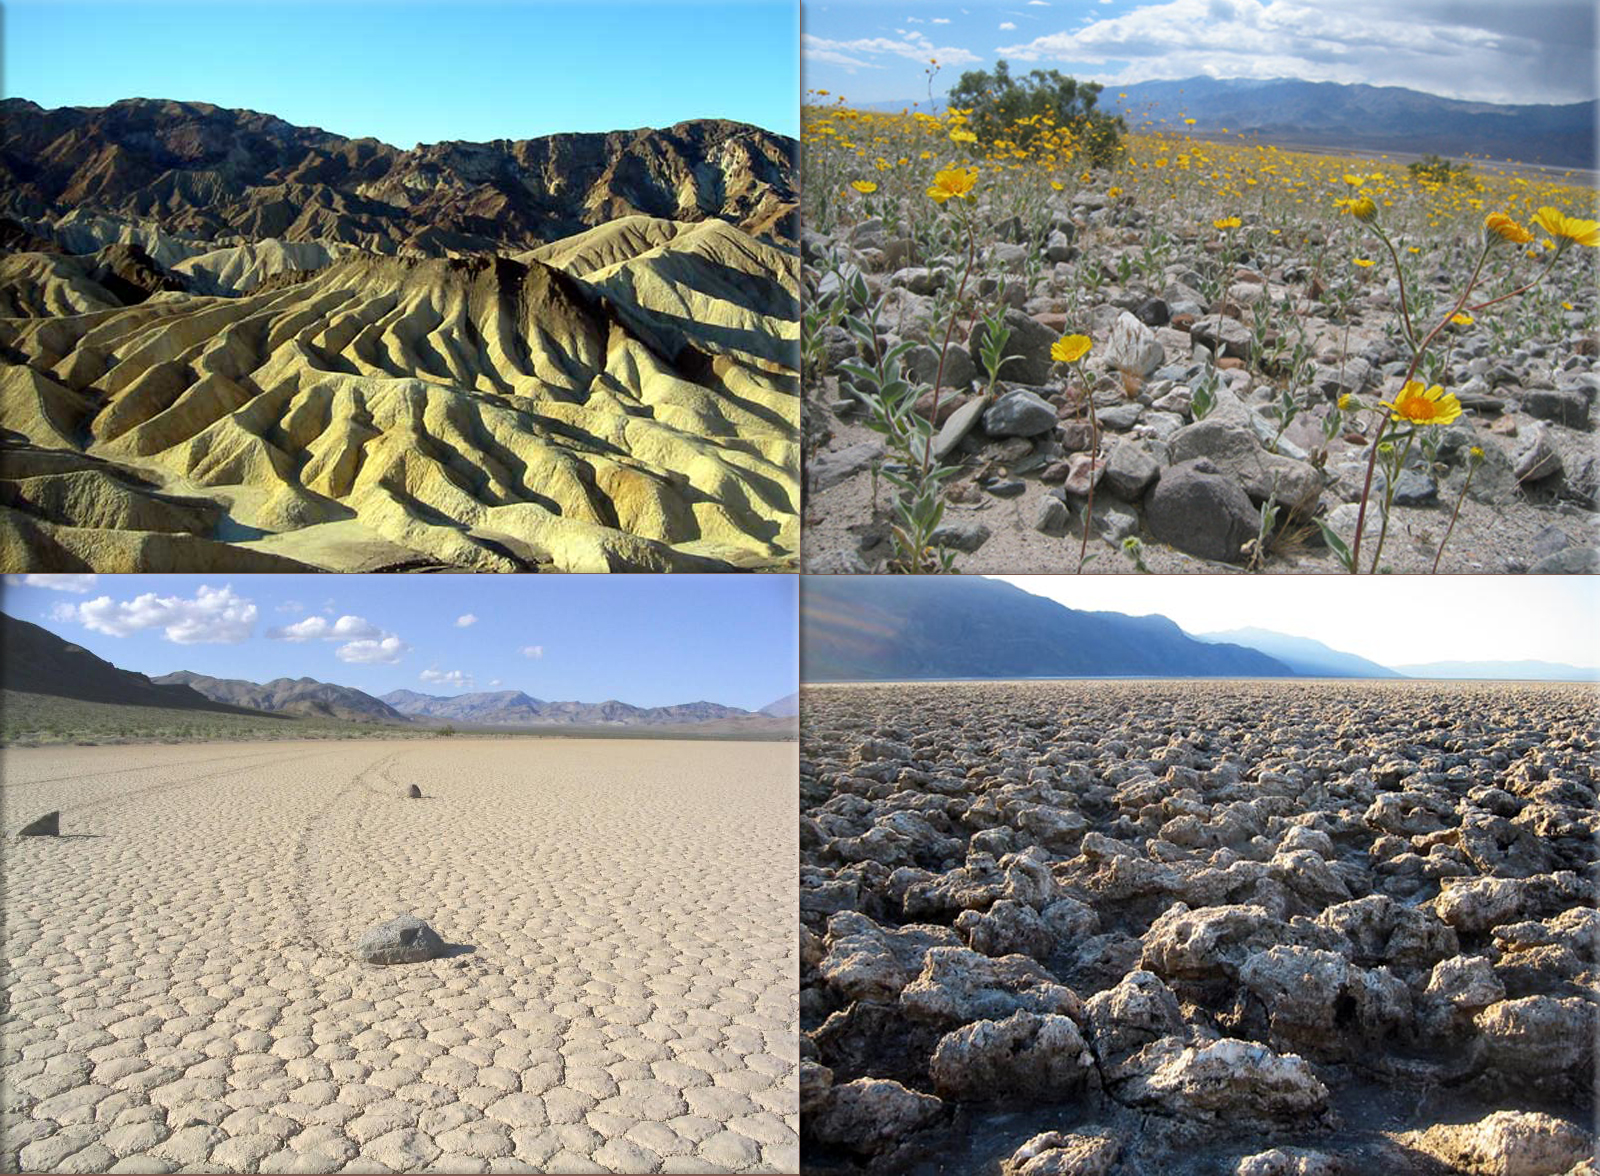 Death Valley, California hits 134 °F (~56.7 °C), the highest temperature recorded in the United States